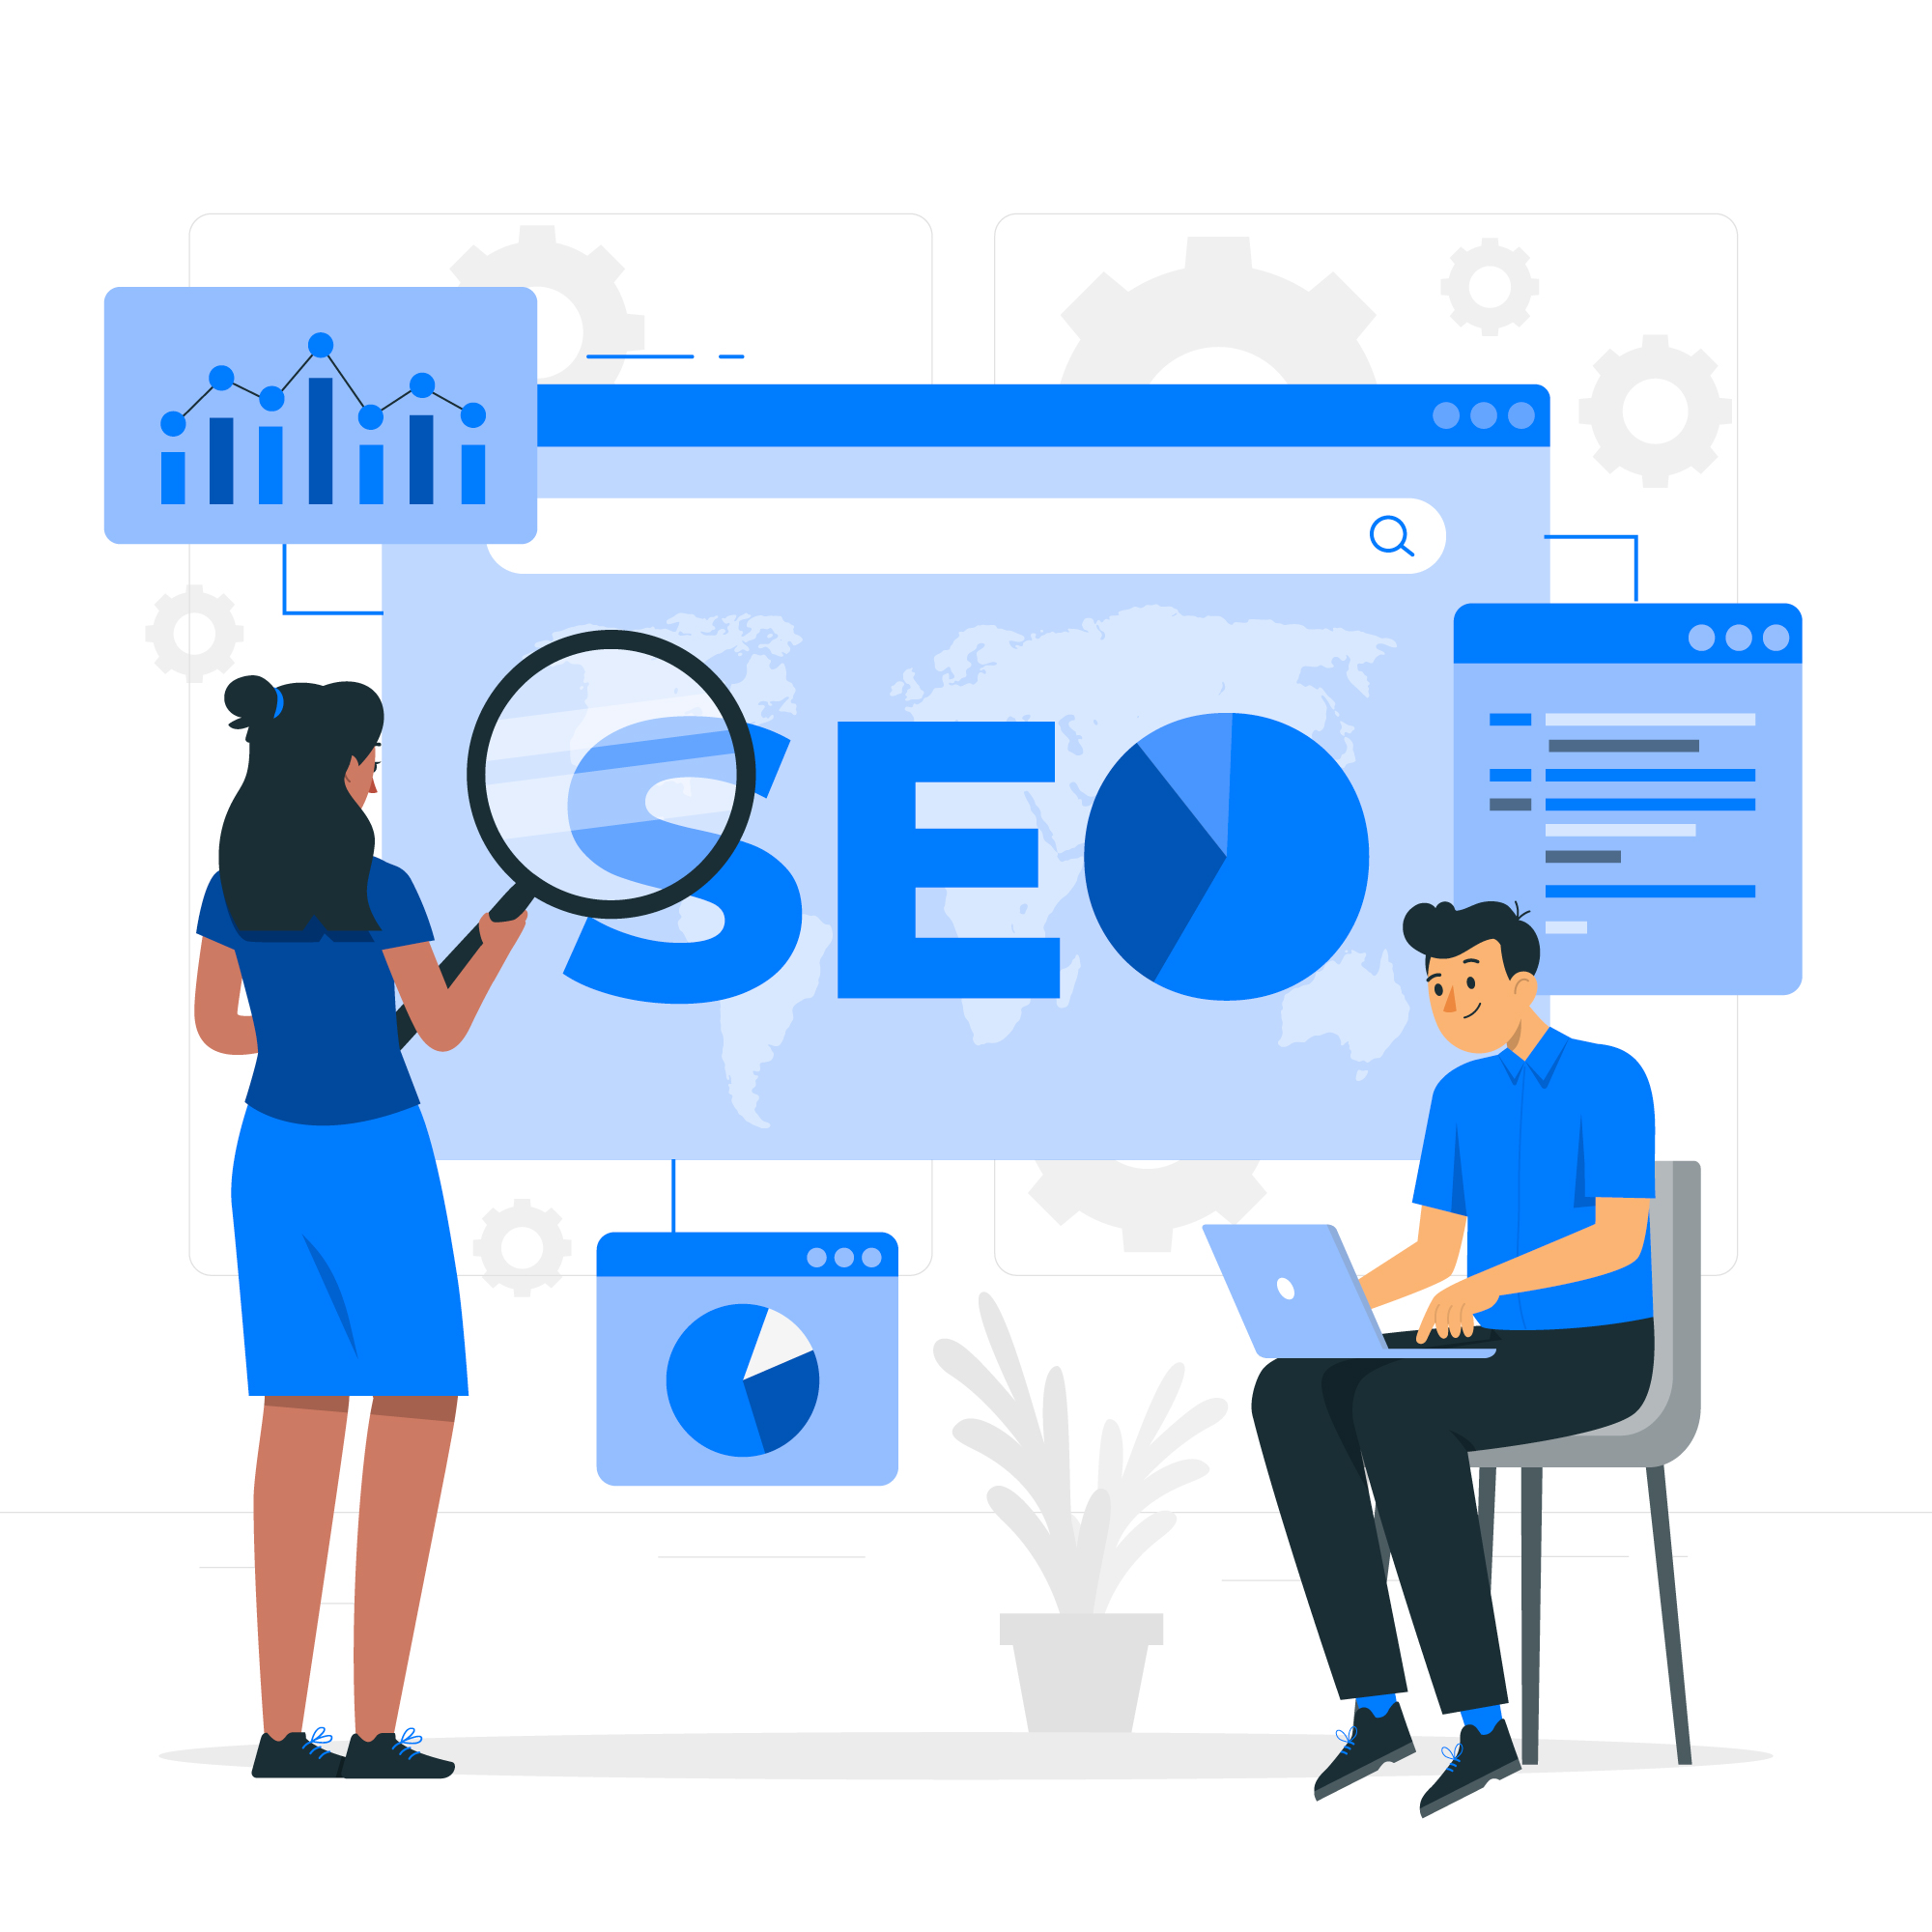 SEO elements like keywords, on-page and off-page optimization, and content marketing help with better website traffic and rankings